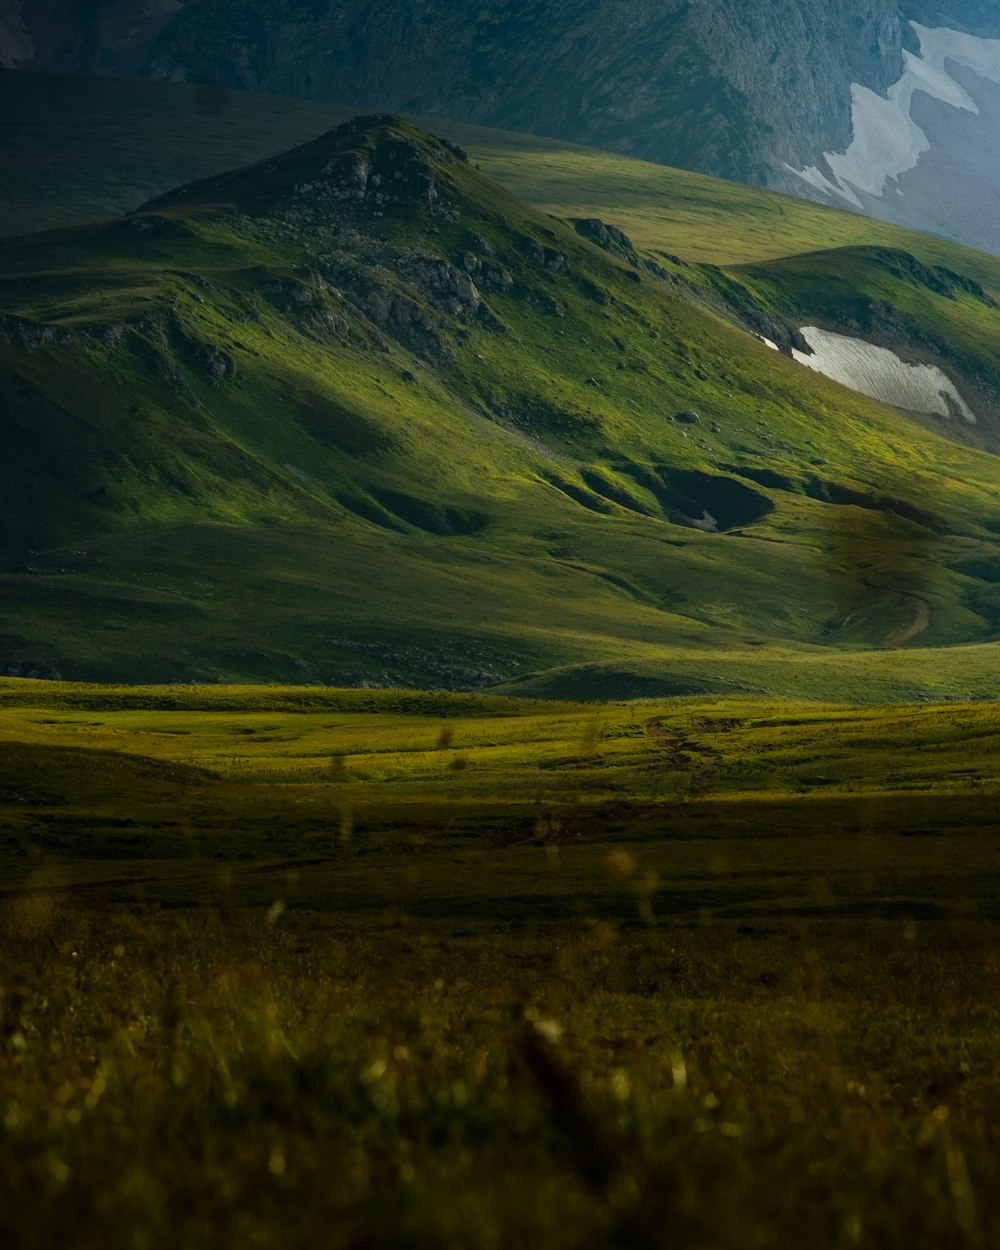 a grassy field with a mountain in the background